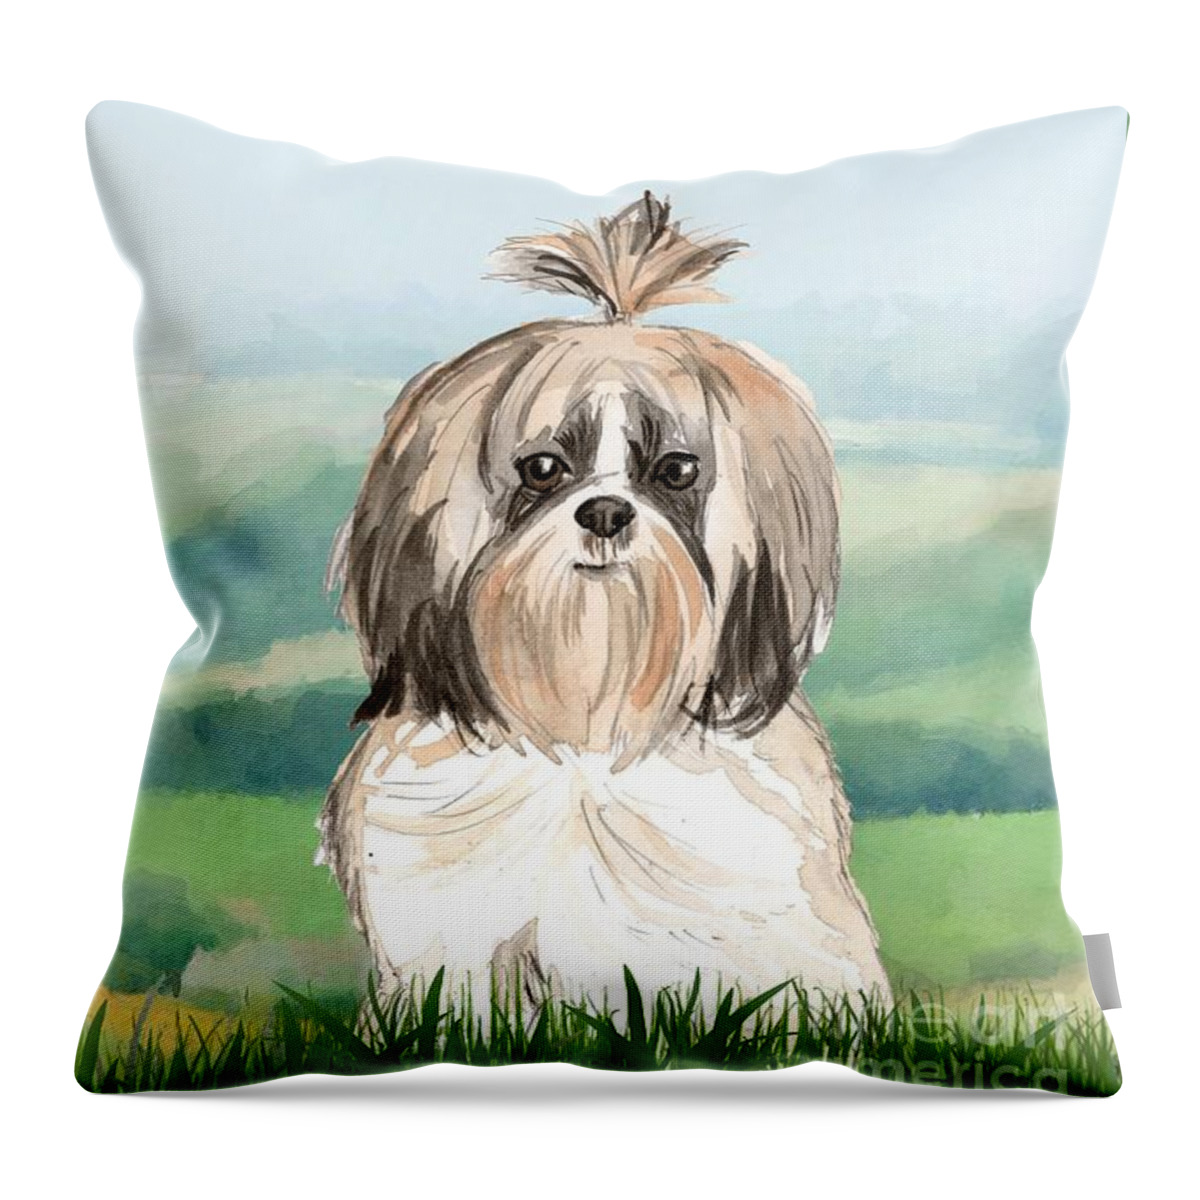 Dog Throw Pillow featuring the painting Shih Tzu by John Edwards